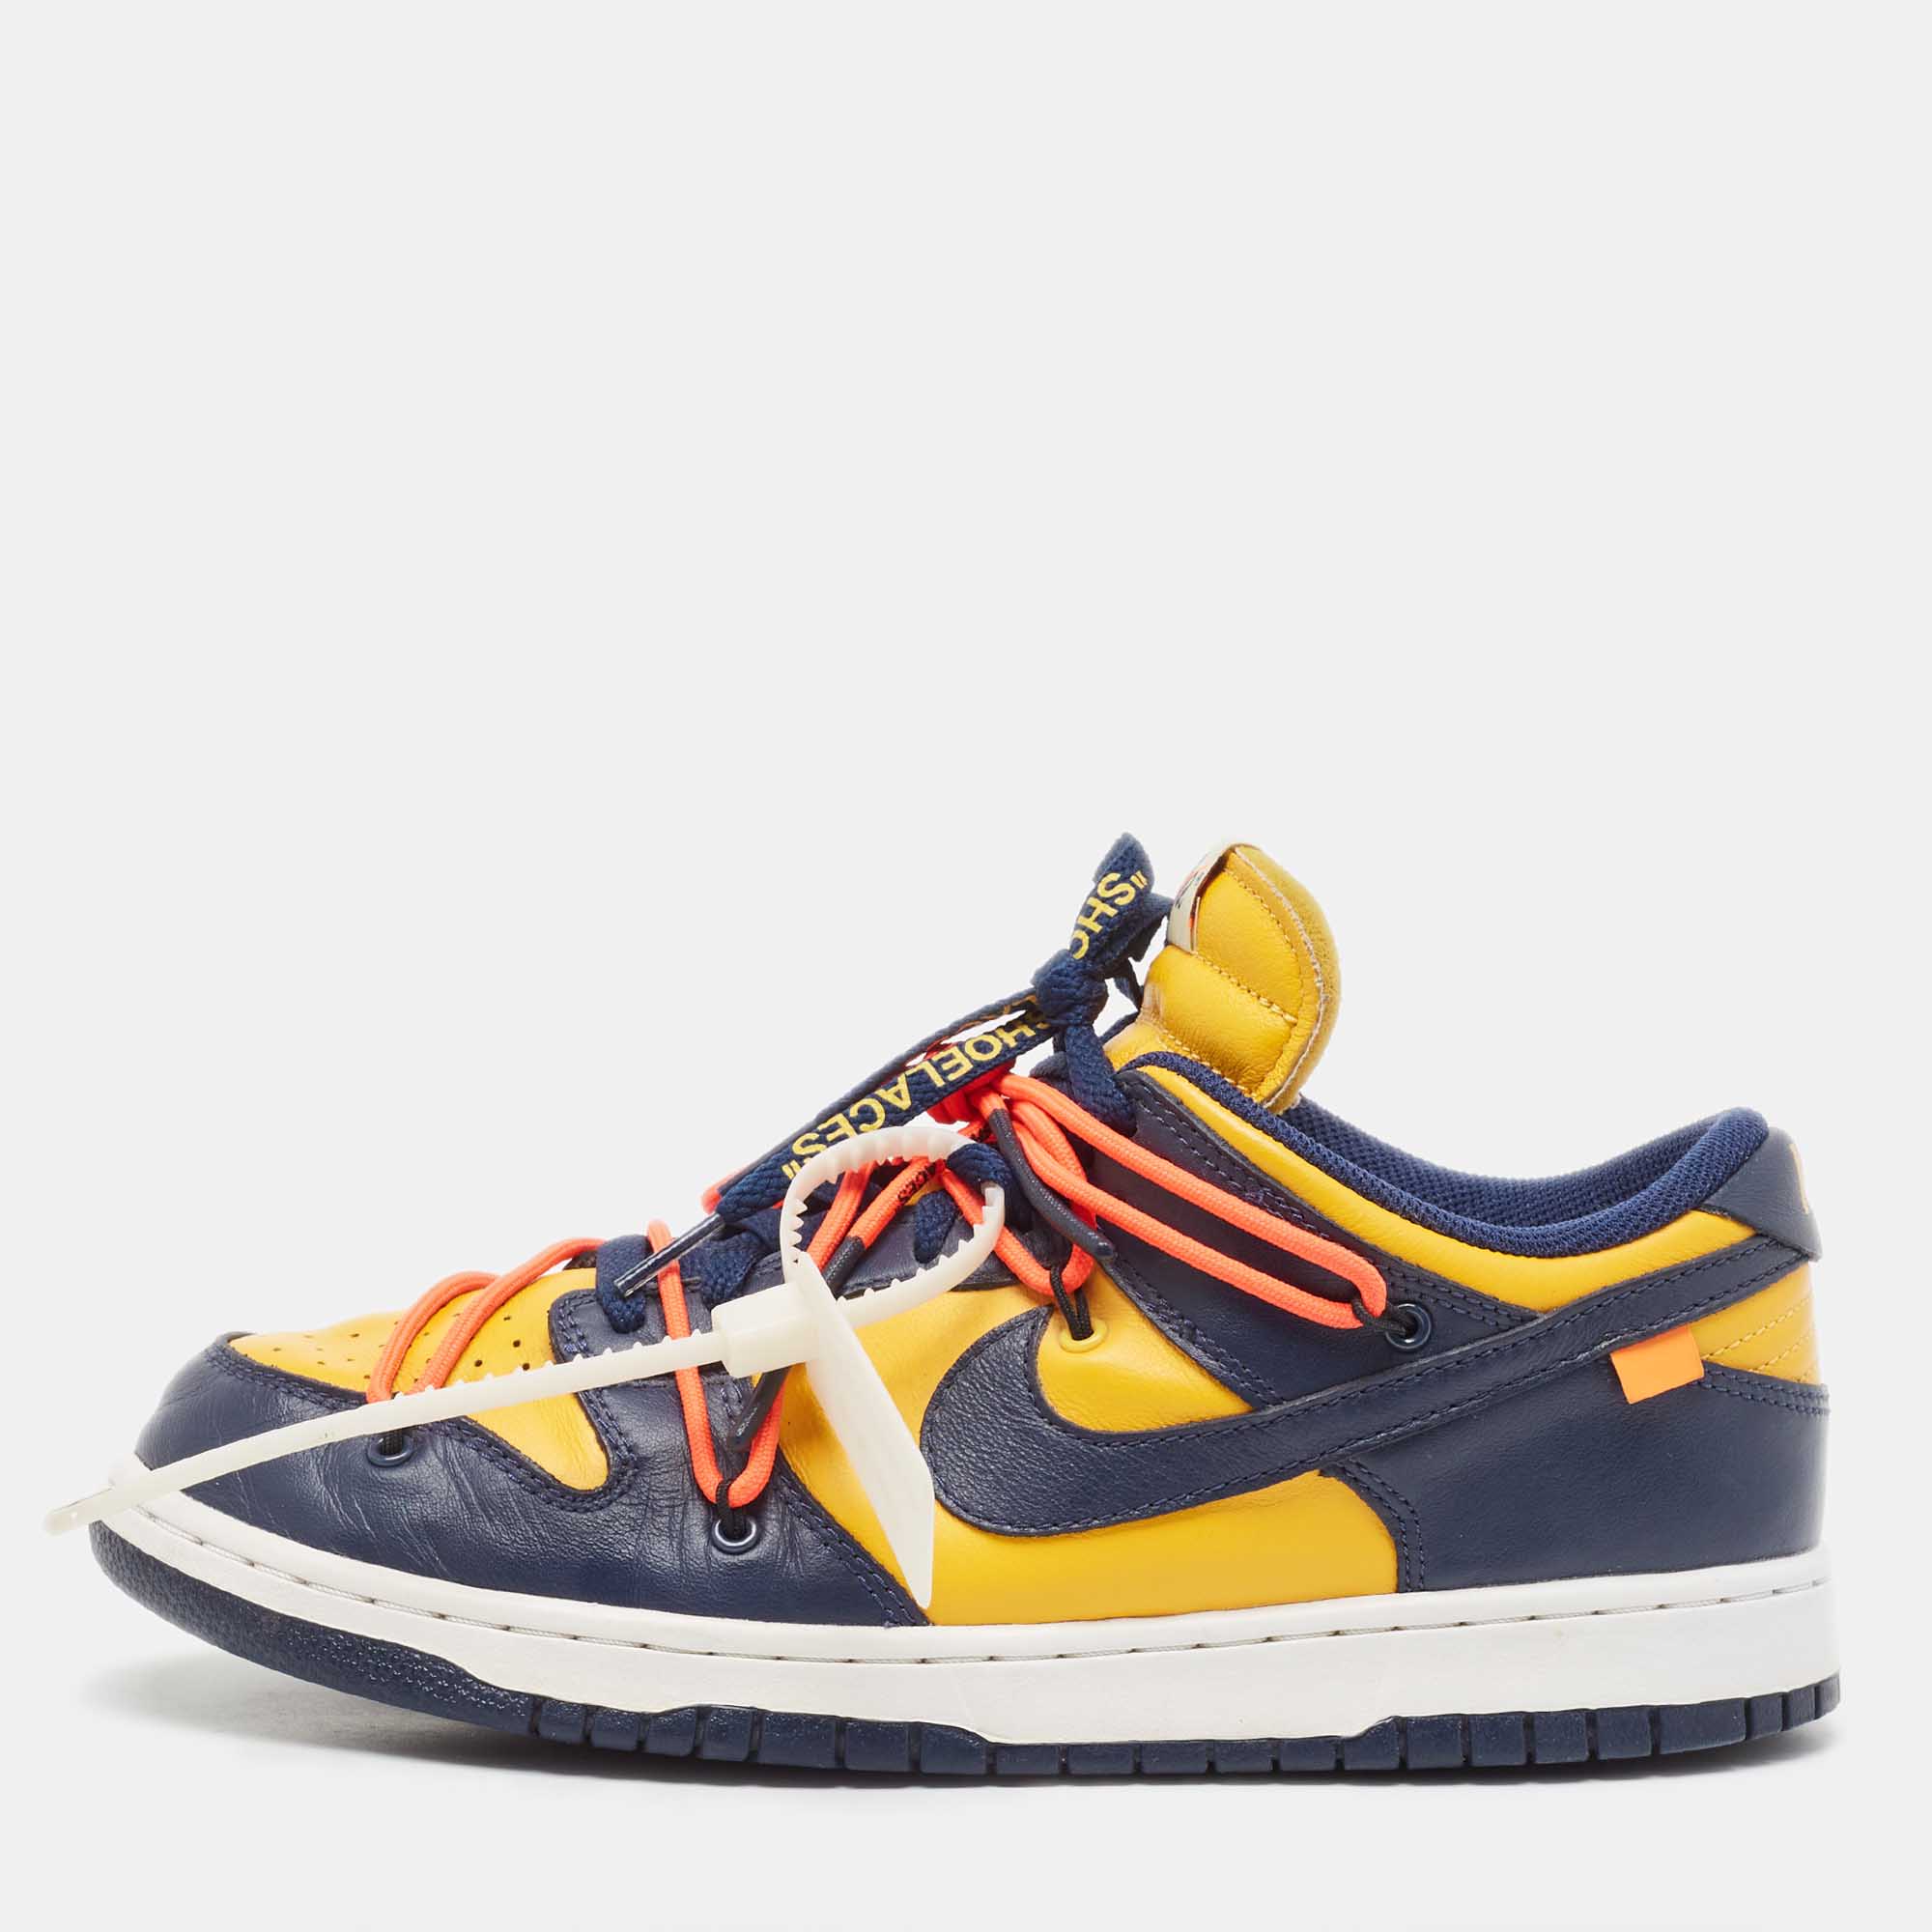 Off-White X Nike Yellow/Navy Blue Leather Michigan Sneakers Size 42.5